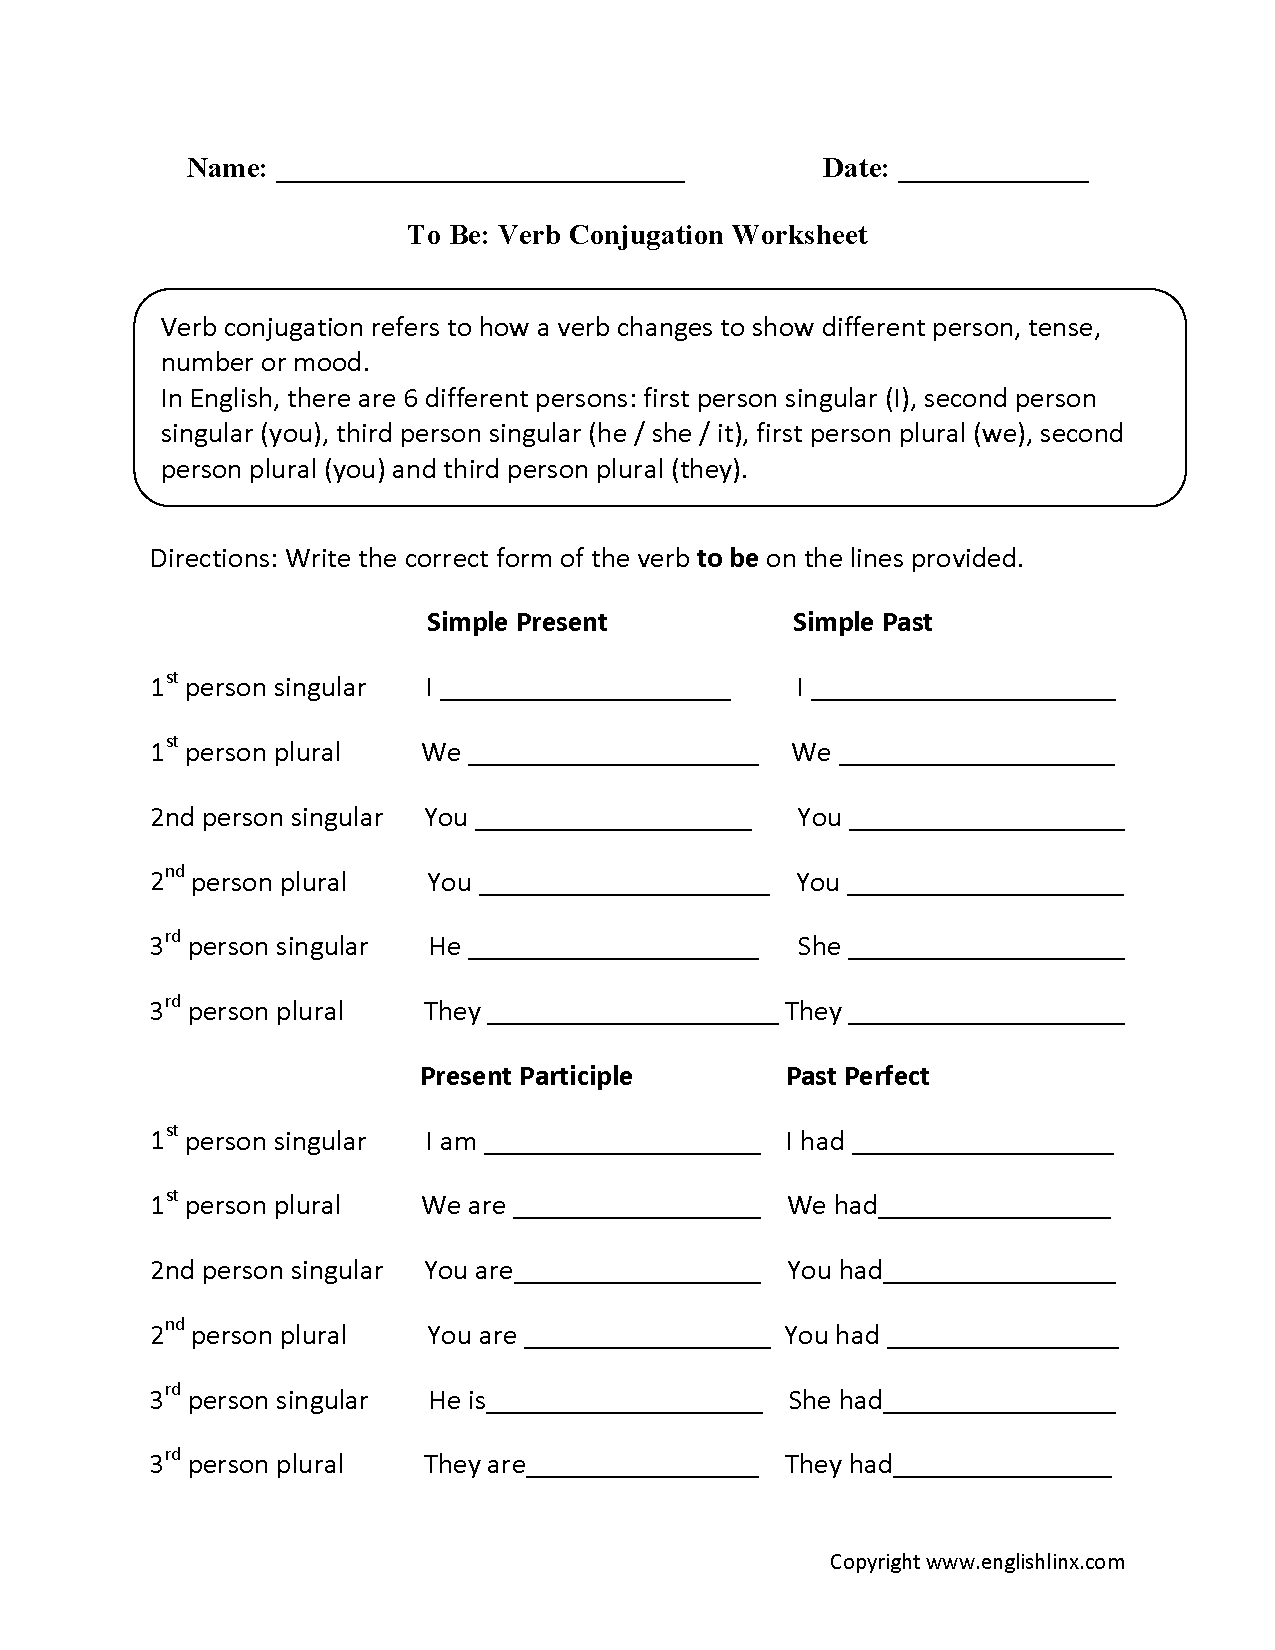 Troublesome Verbs Worksheets With Answers Db excel